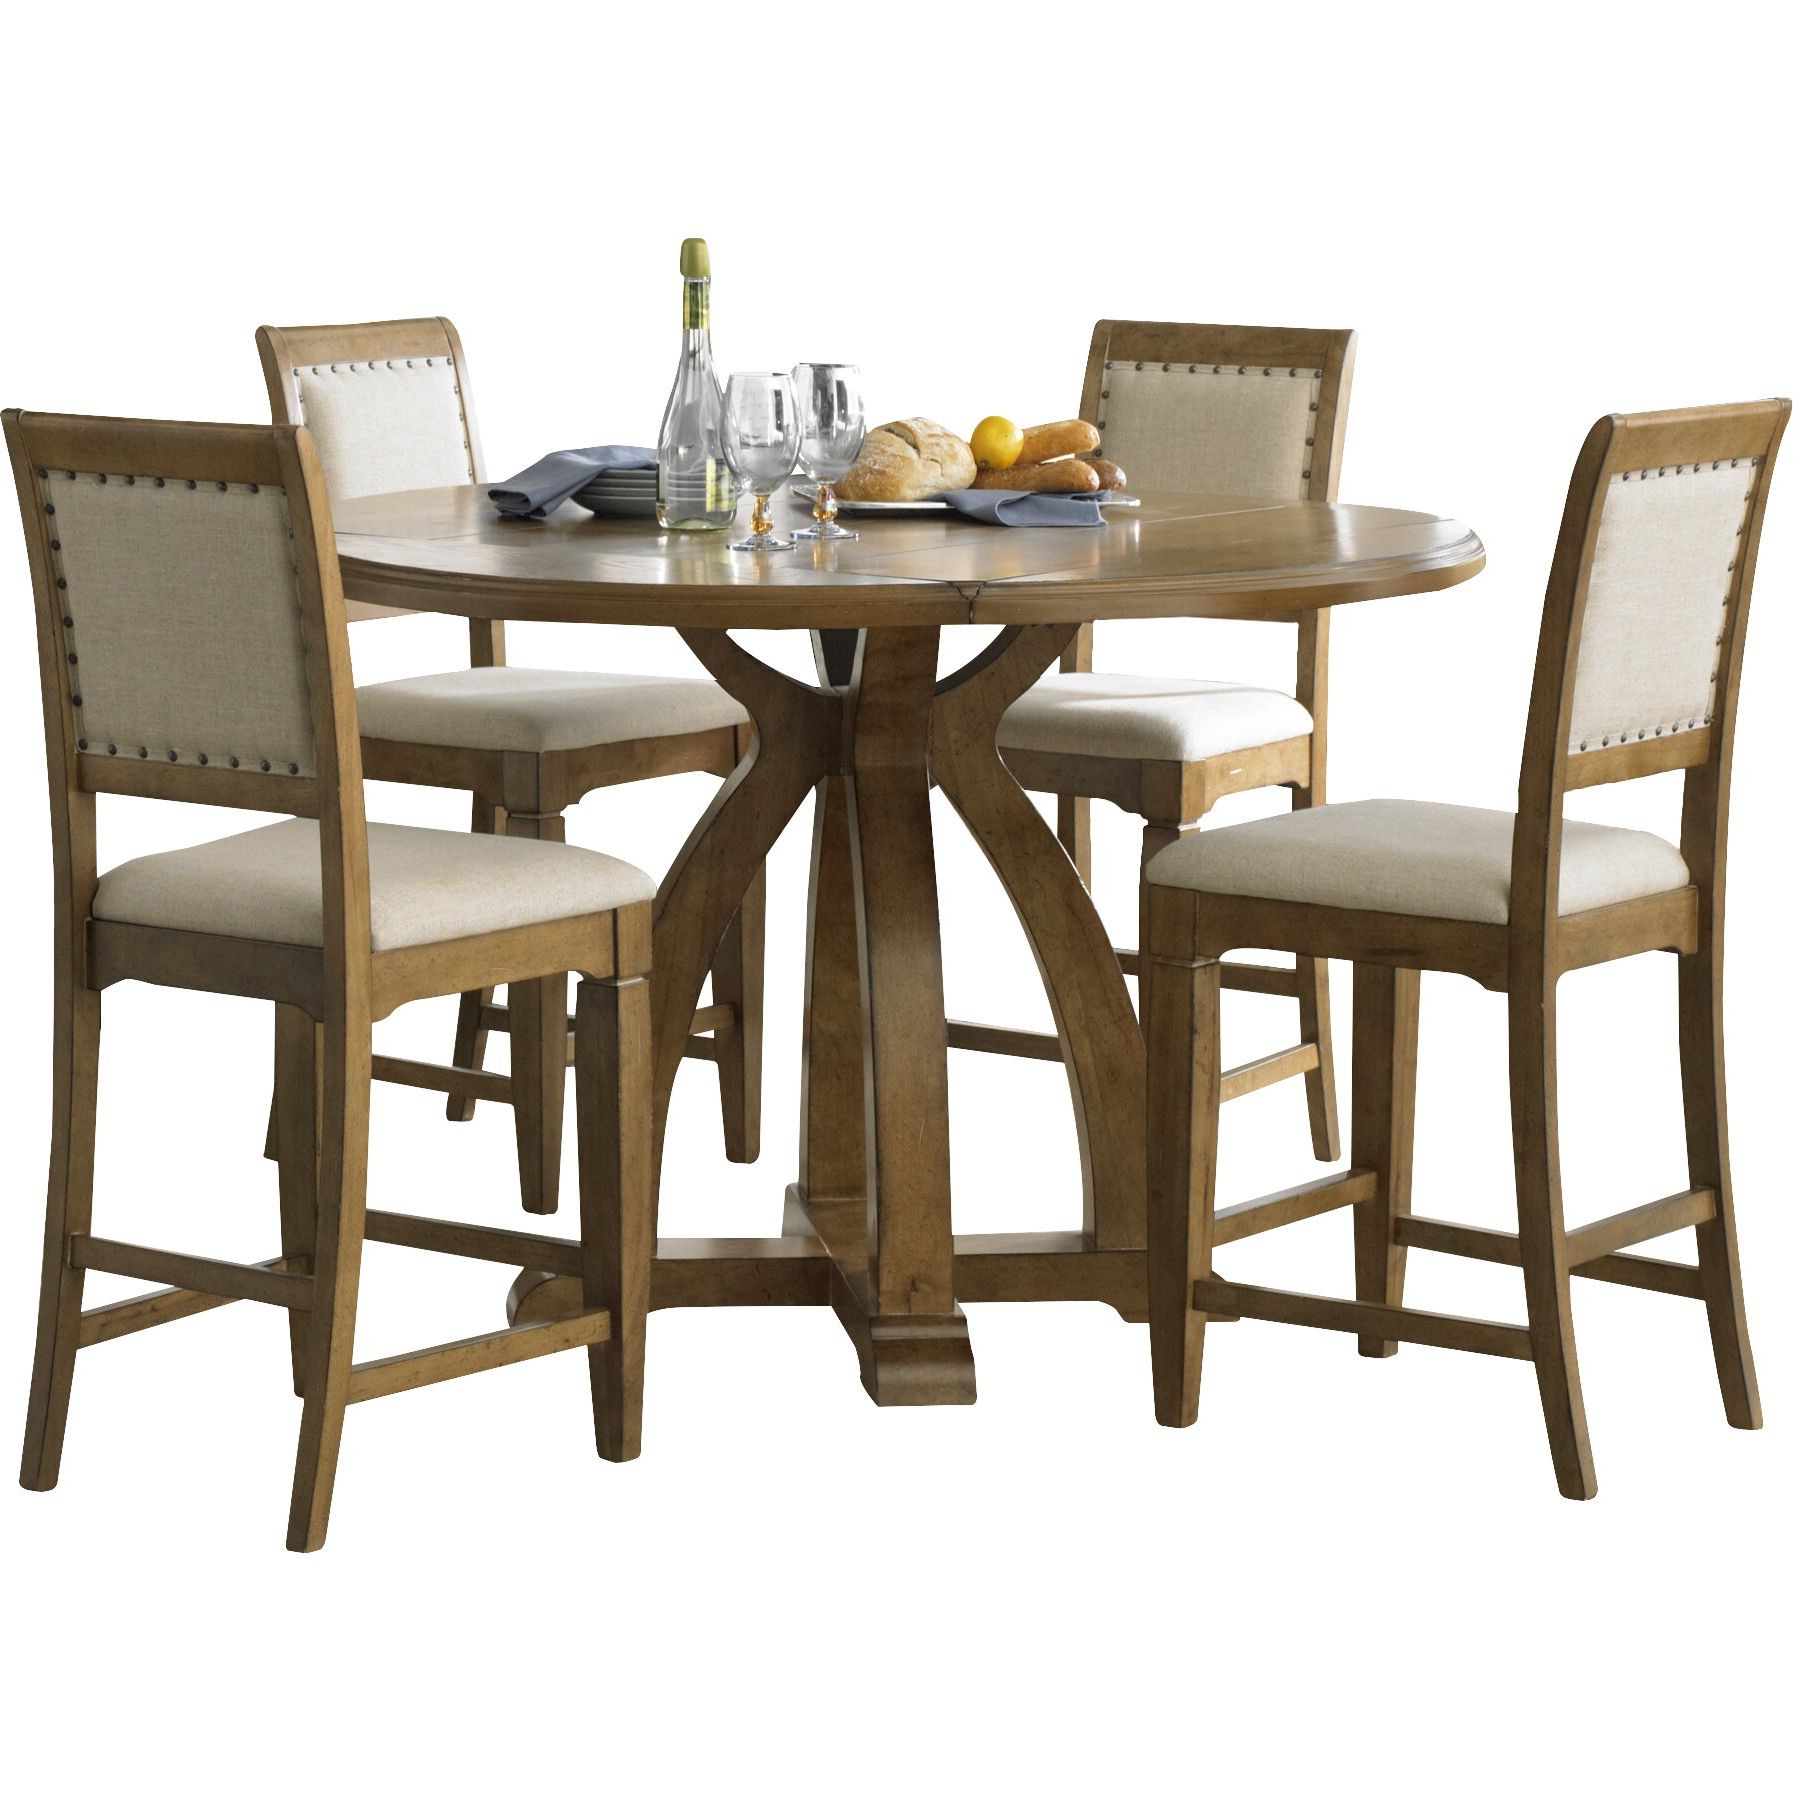 Wayfair With Well Known Counter Height Pedestal Dining Tables (View 8 of 20)